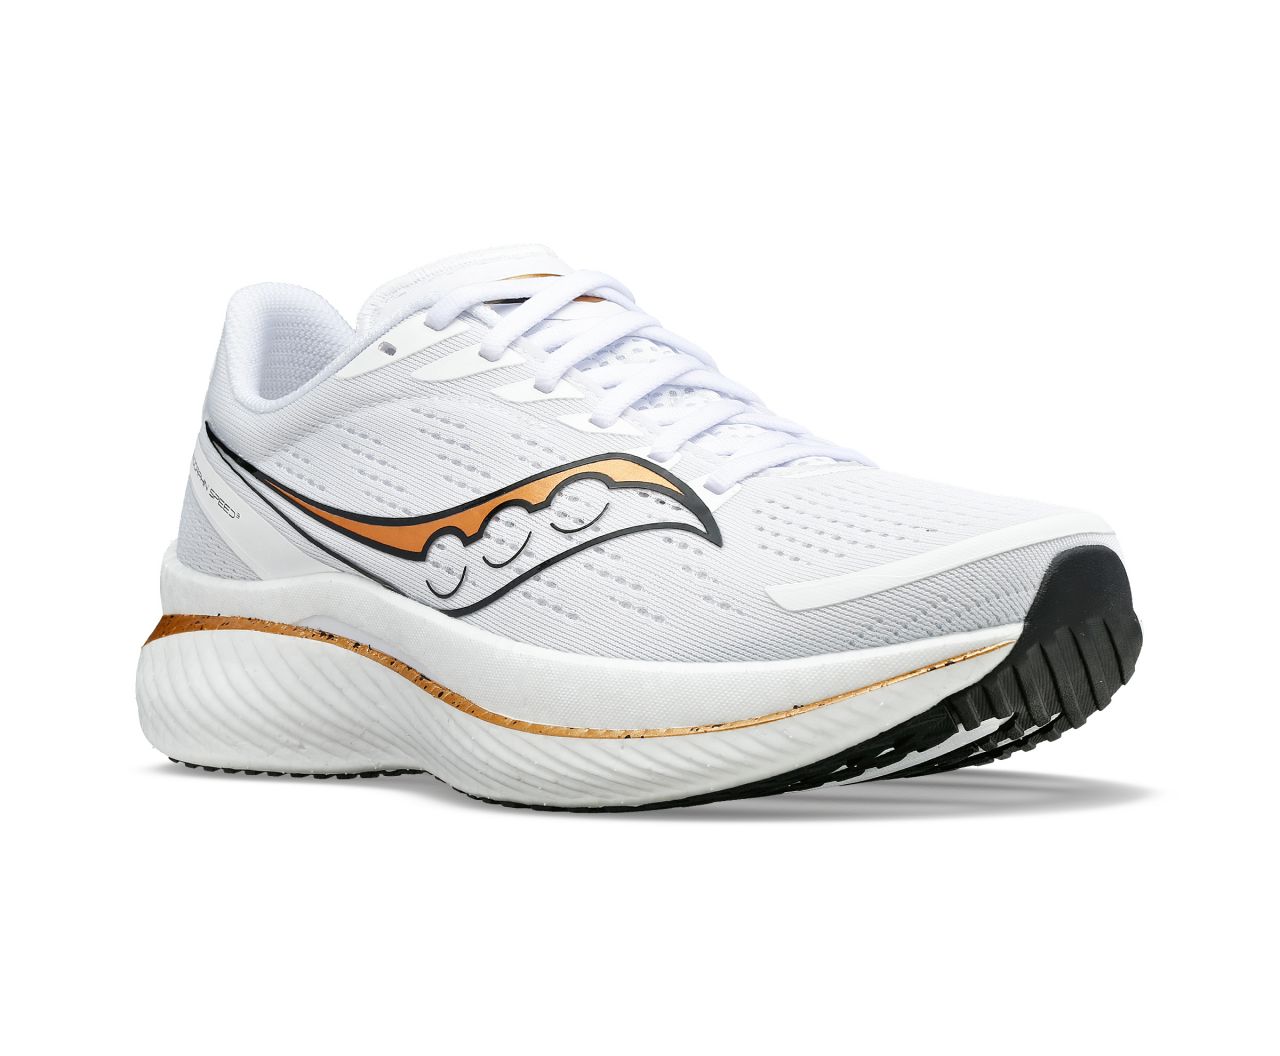 SAUCONY ENDORPHIN SPEED 3 WHITE ET GOLD Chaussures running saucony